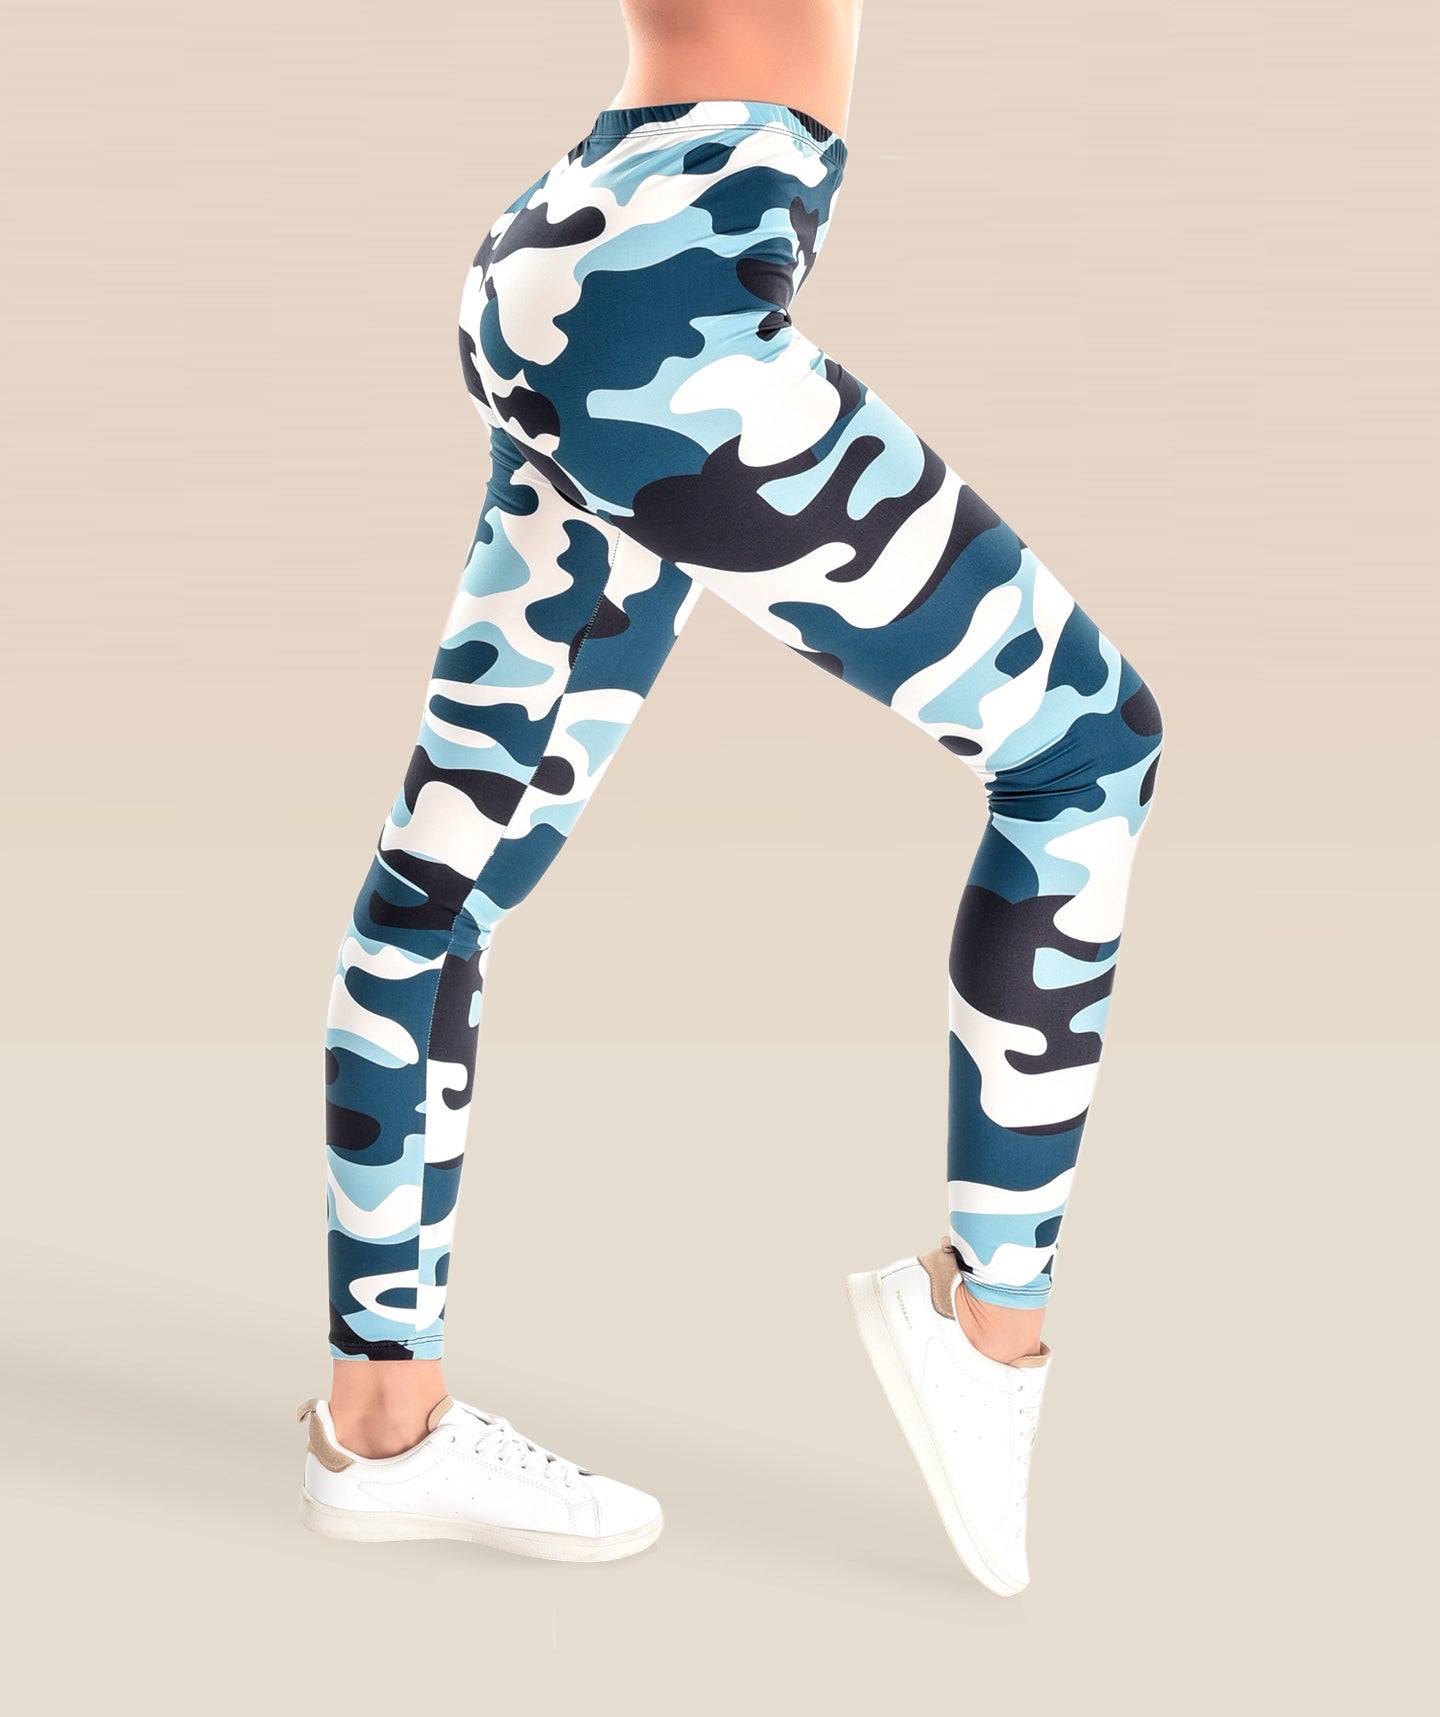 Camo Leggings in Navy Blue Camouflage Print –